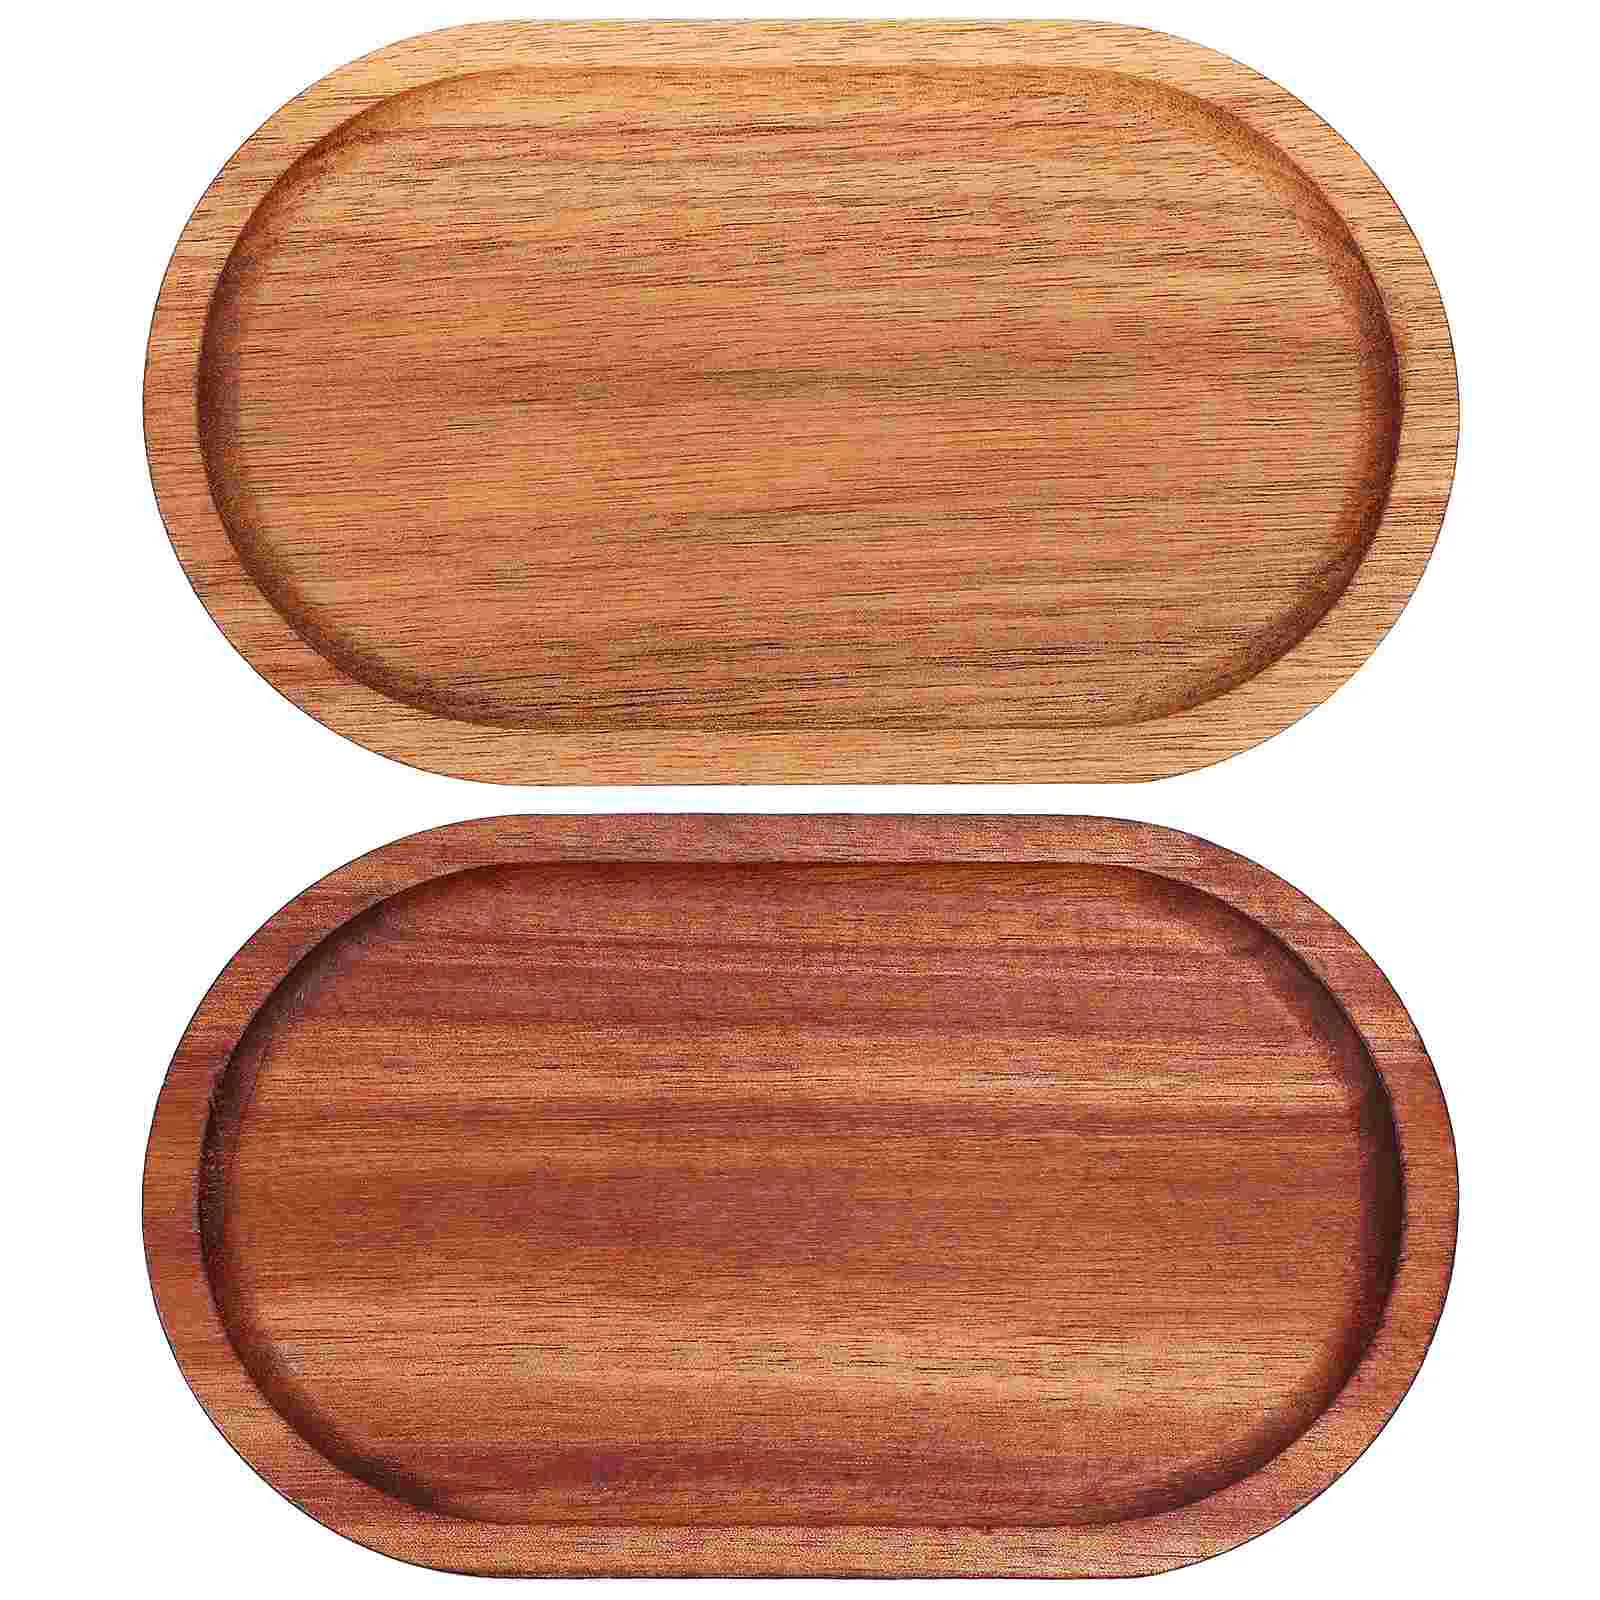 

Wooden Trays Food Kitchen Counter Oval Charcuterie Board Plate Cheese Platters Serving Decor Small Jewelry